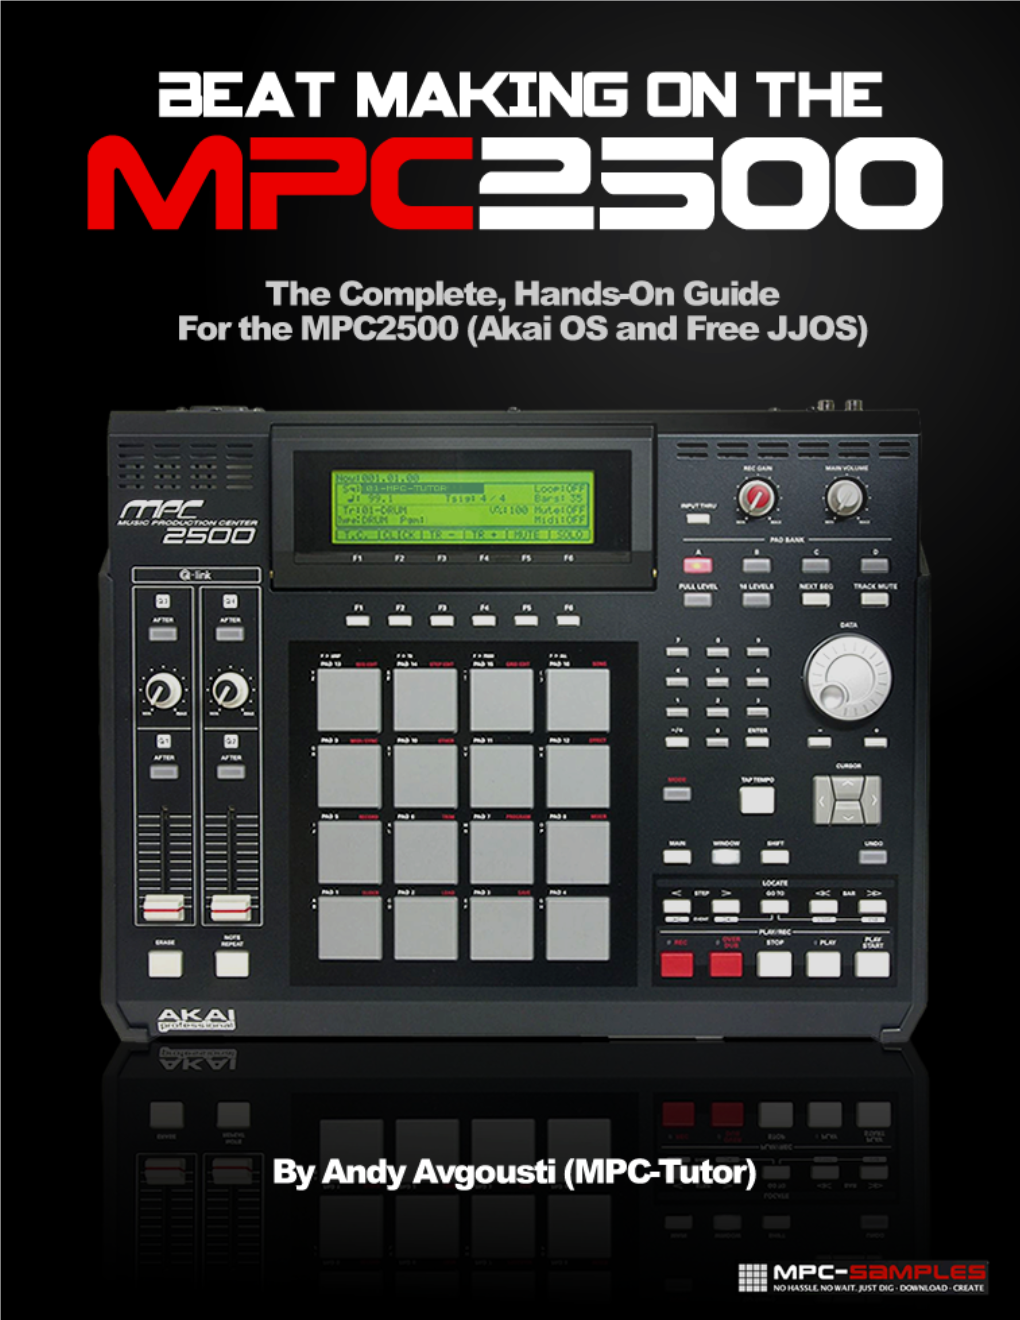 Beat Making on the MPC2500 – Contents in Brief